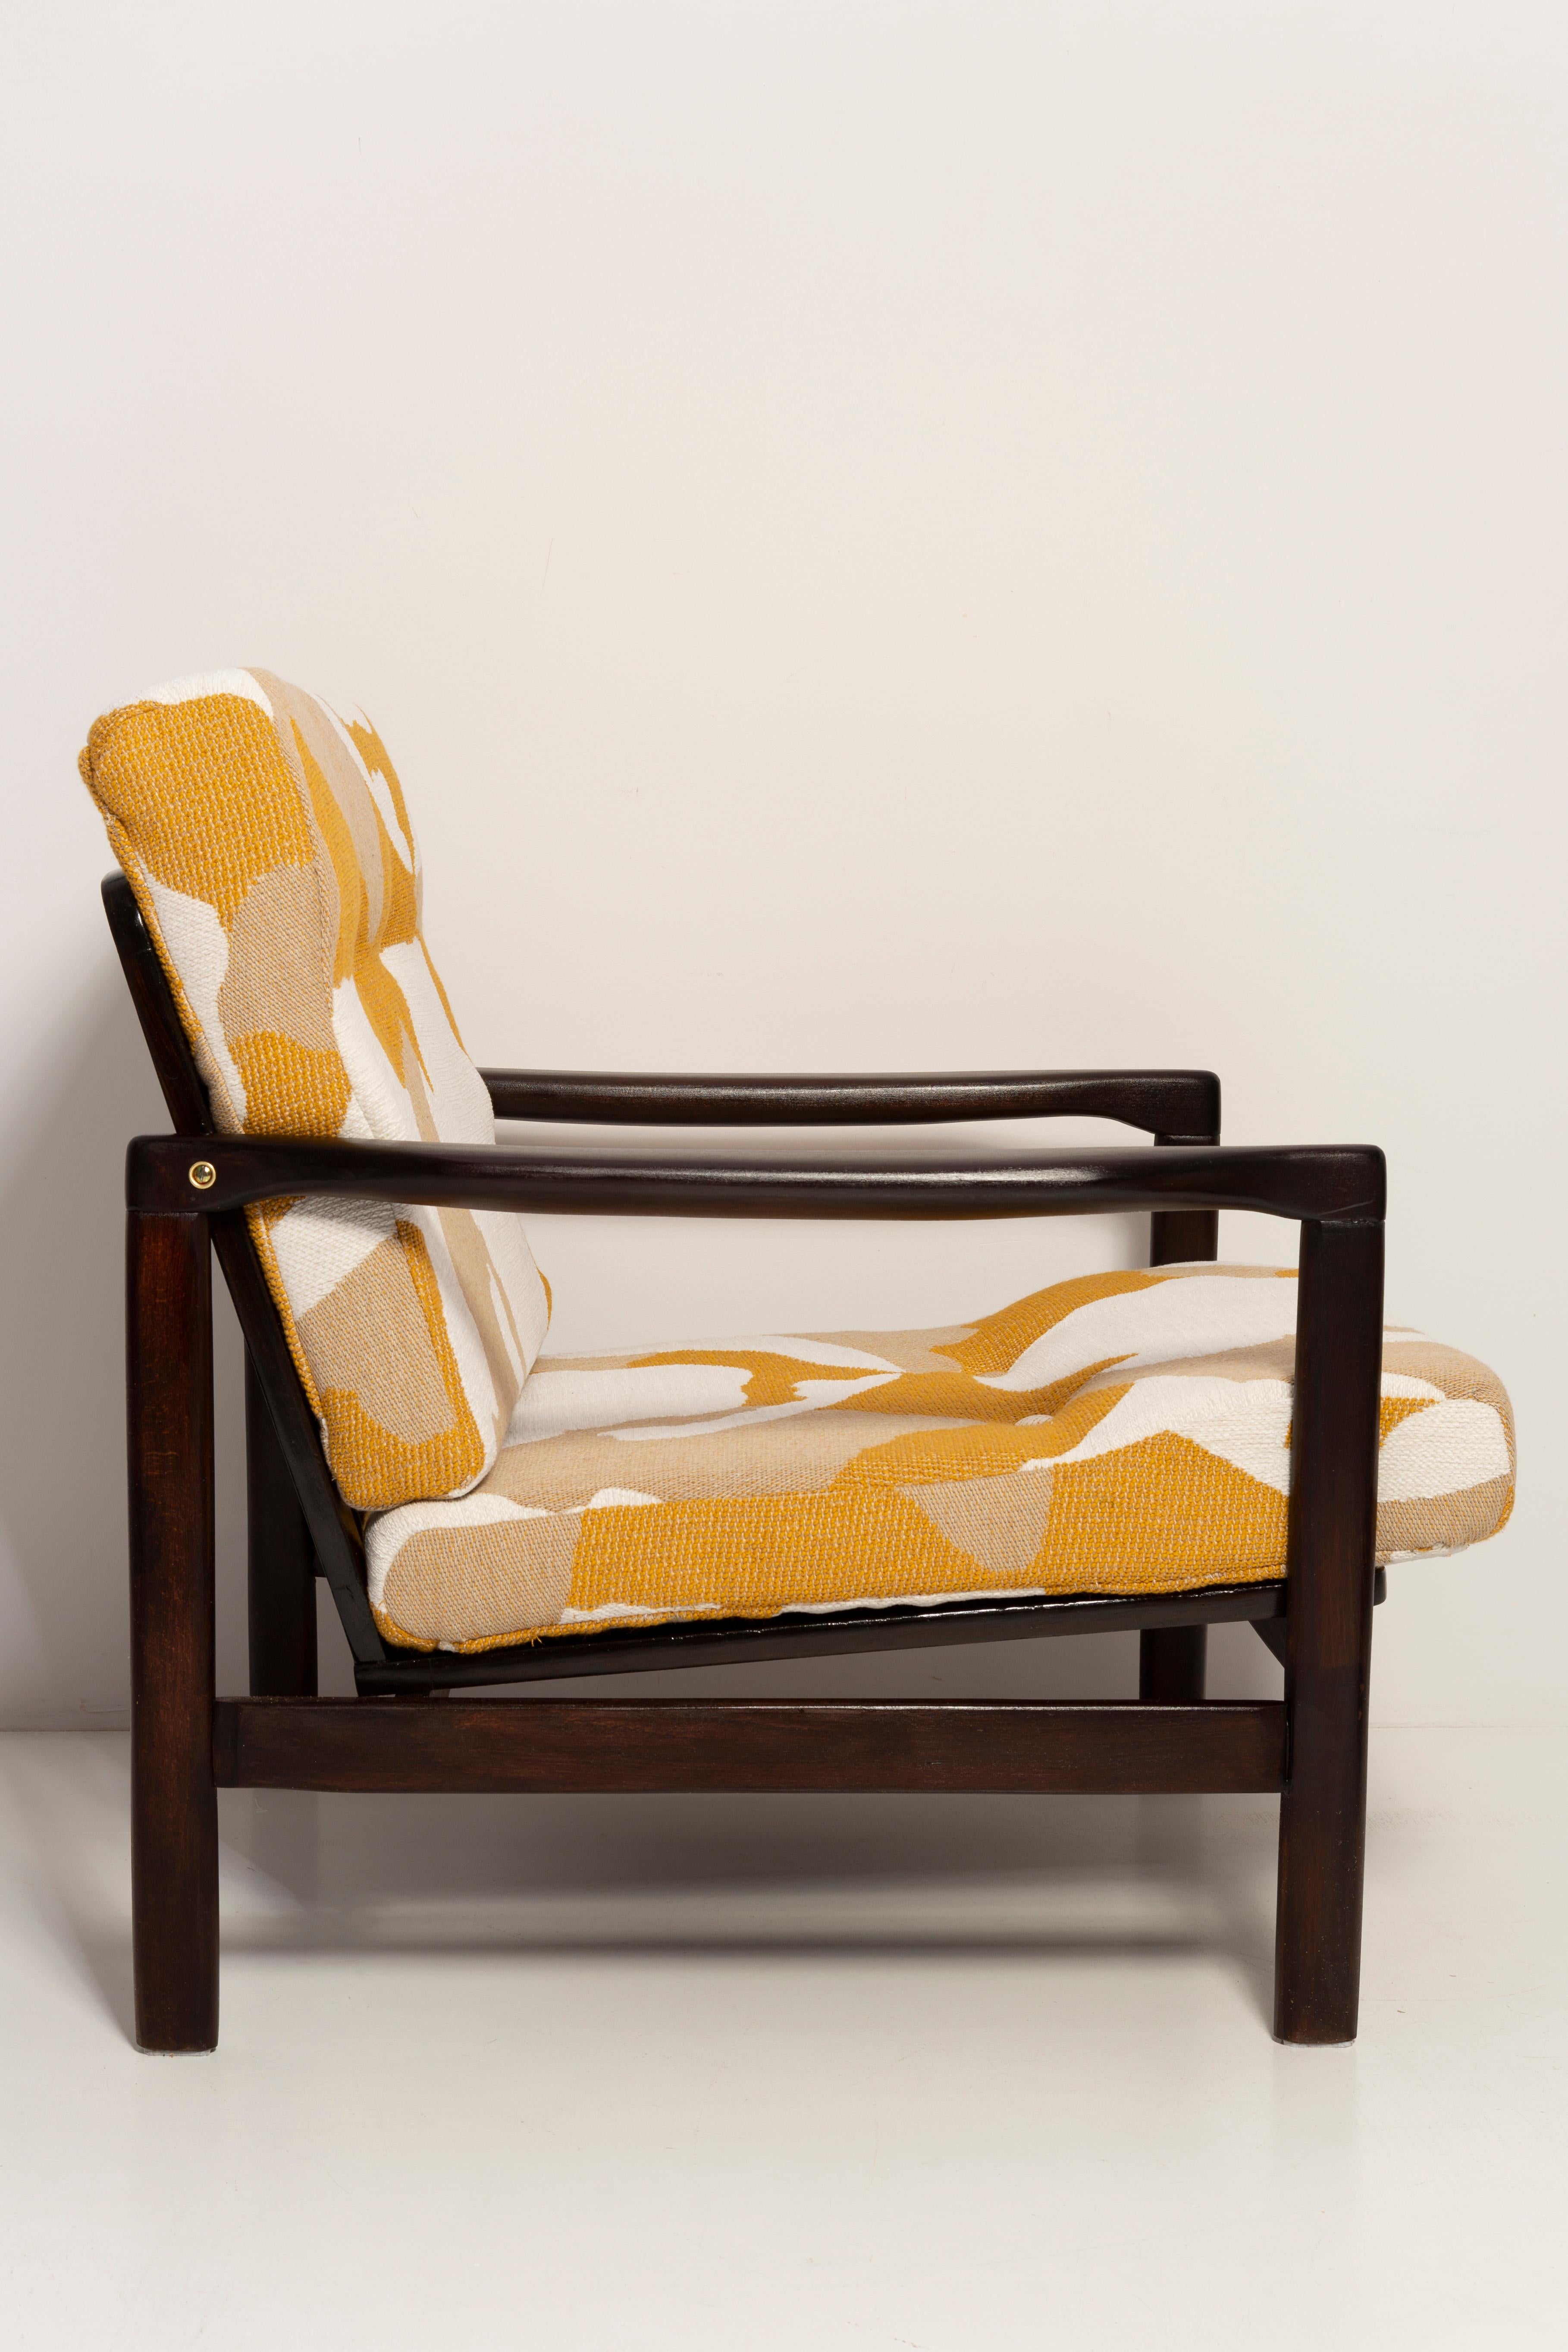 Hand-Crafted Mid Century Yellow and White Camouflage Armchair, Zenon Baczyk, Poland, 1960s For Sale